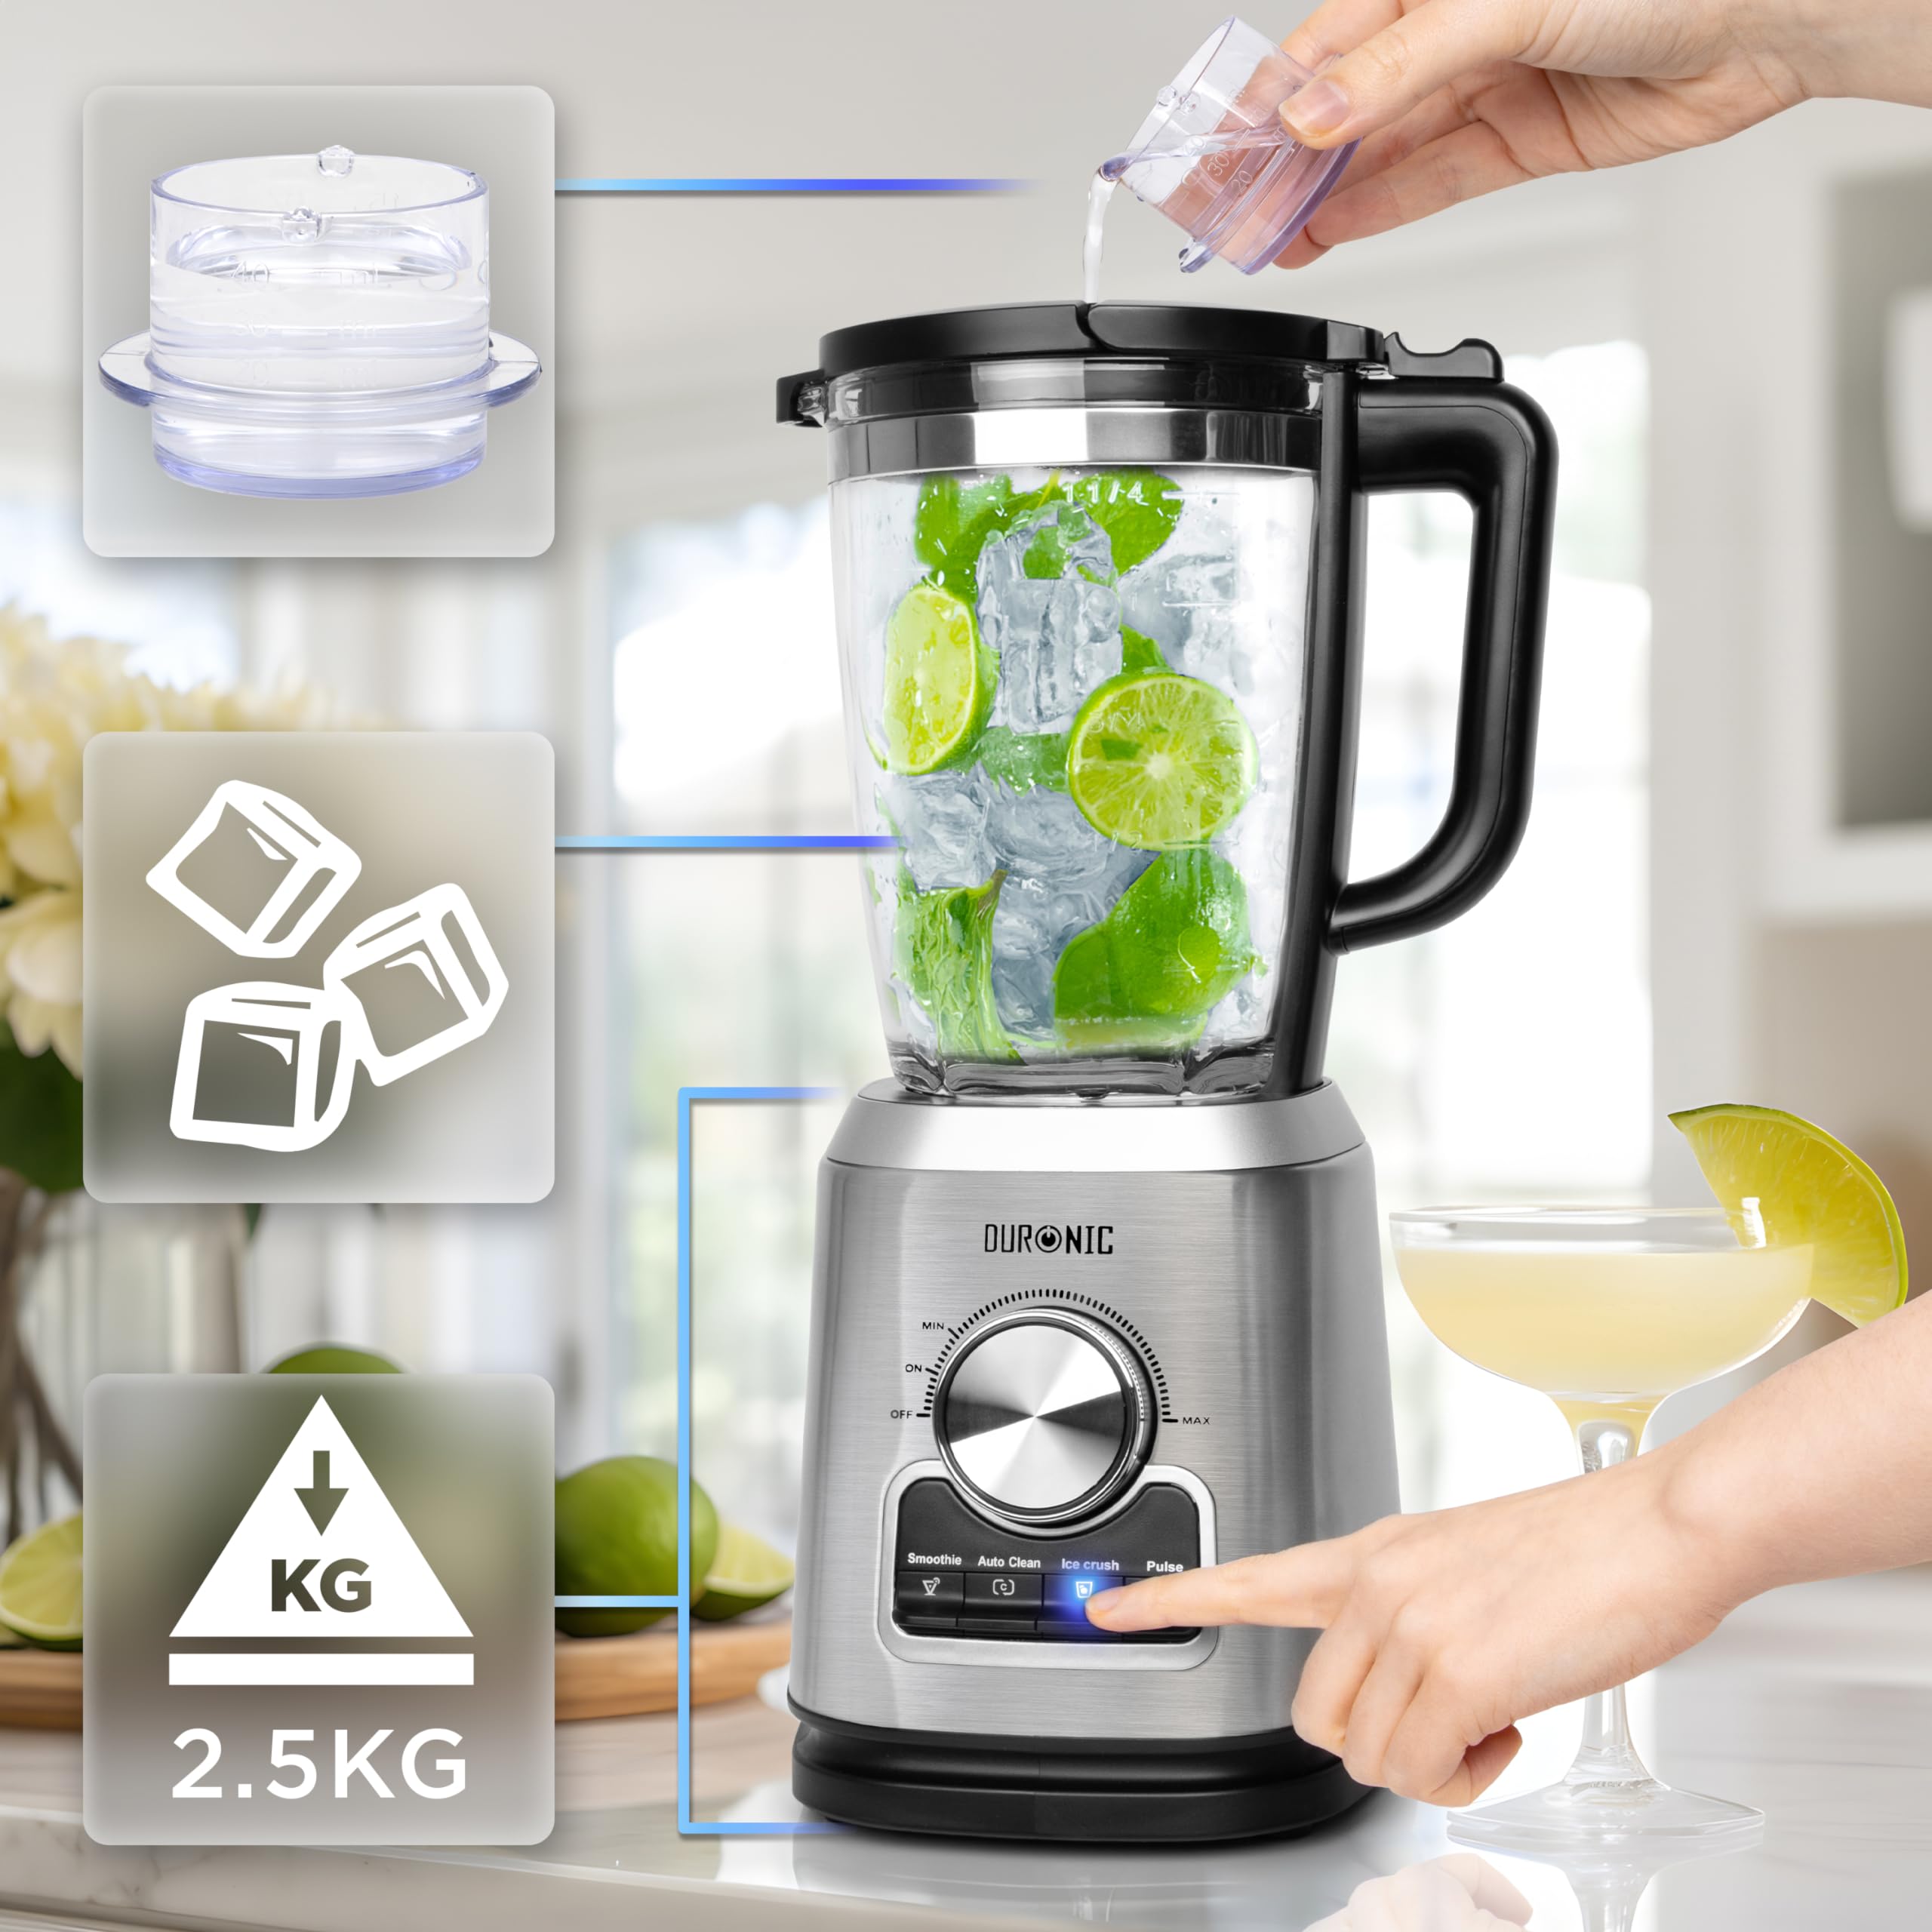 Duronic Jug Blender BL114 with Grinder 1.75L Glass Table Jug, 1400W Stainless Steel Mini Blender with 6 sided Blades, with Pre-Set Functions, Ideal for Baby food, Soups and Protein Shakes